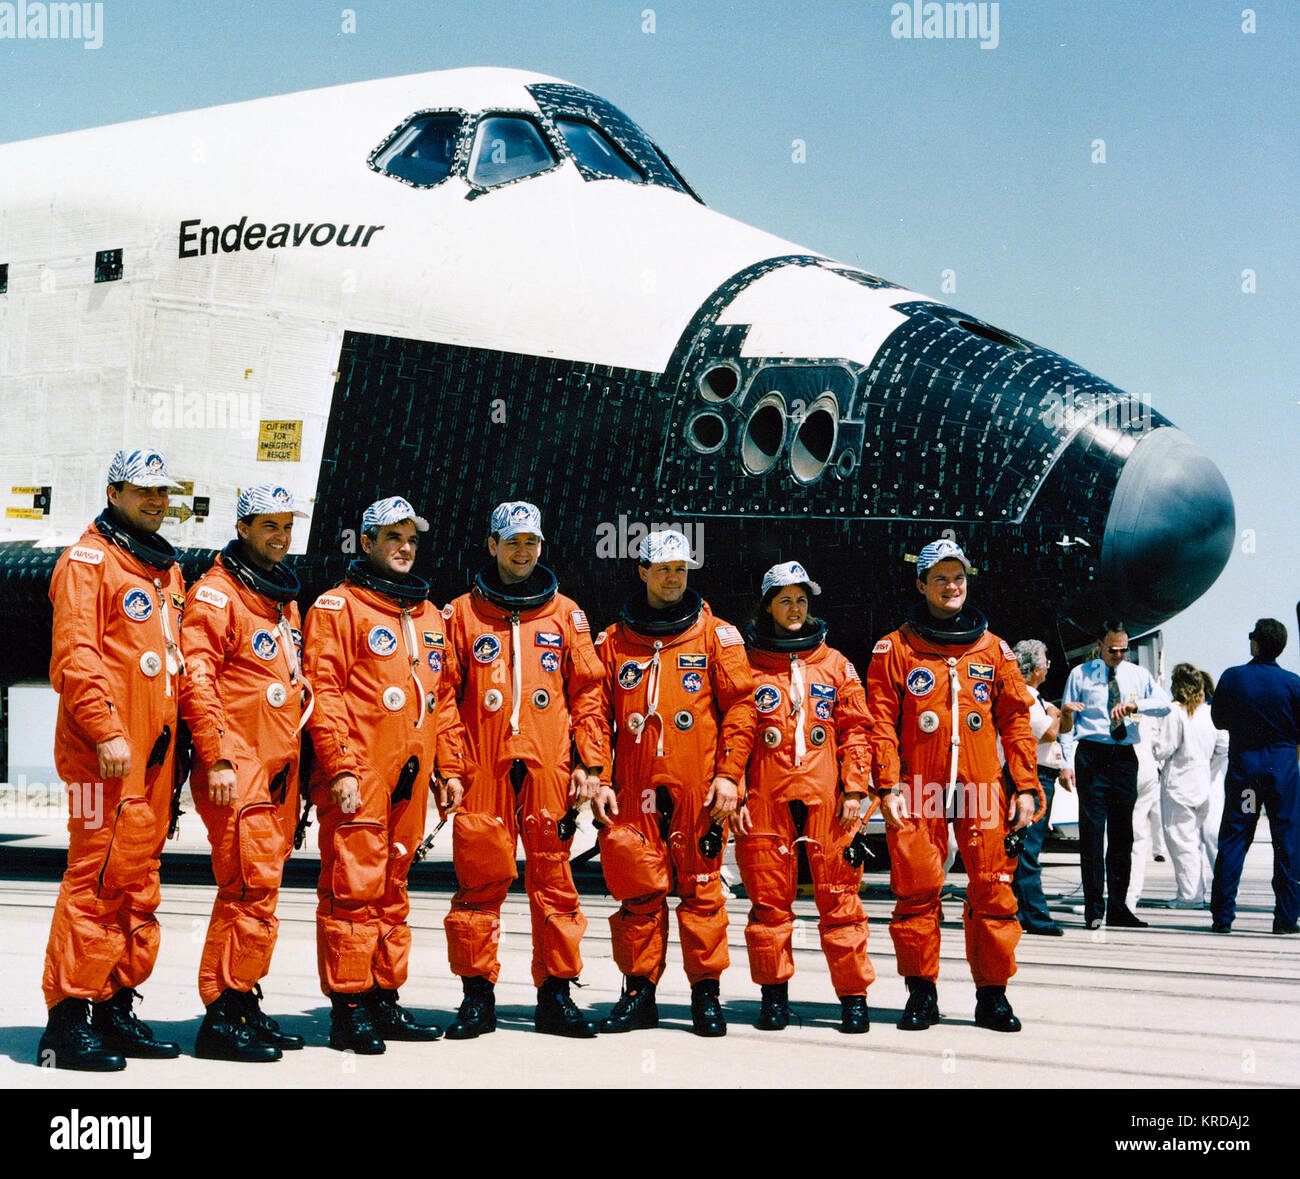 THE SEVEN CREWMEMBERS OF STS-49 POSE NEAR ENDEAVOUR SOON AFTER LANDING. L TO R: RICHARD HIEB; KEVIN CHILTON; DANIEL BRANDENSTEIN; THOMAS AKERS; PIERRE THUOT; KATHRYN THORNTON; BRUCE MELNICK. STS-49 crew Stock Photo